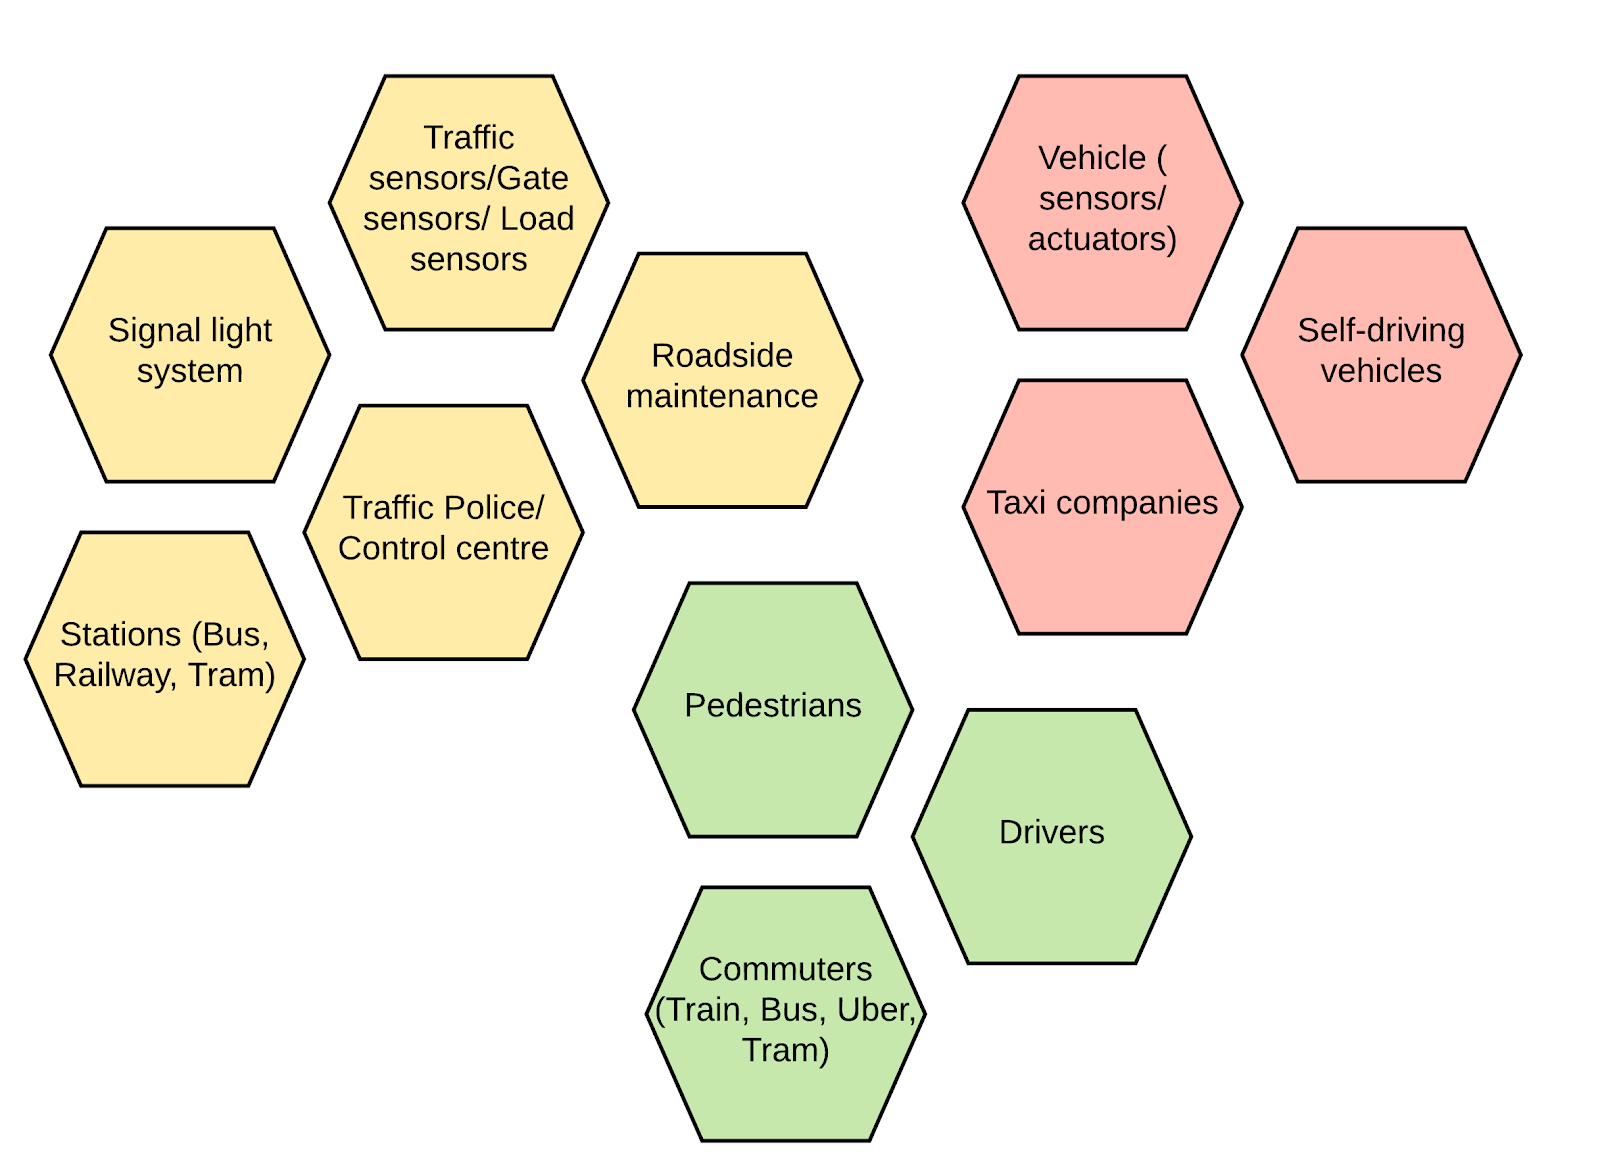 Main stakeholders of ground transportation ecosystem